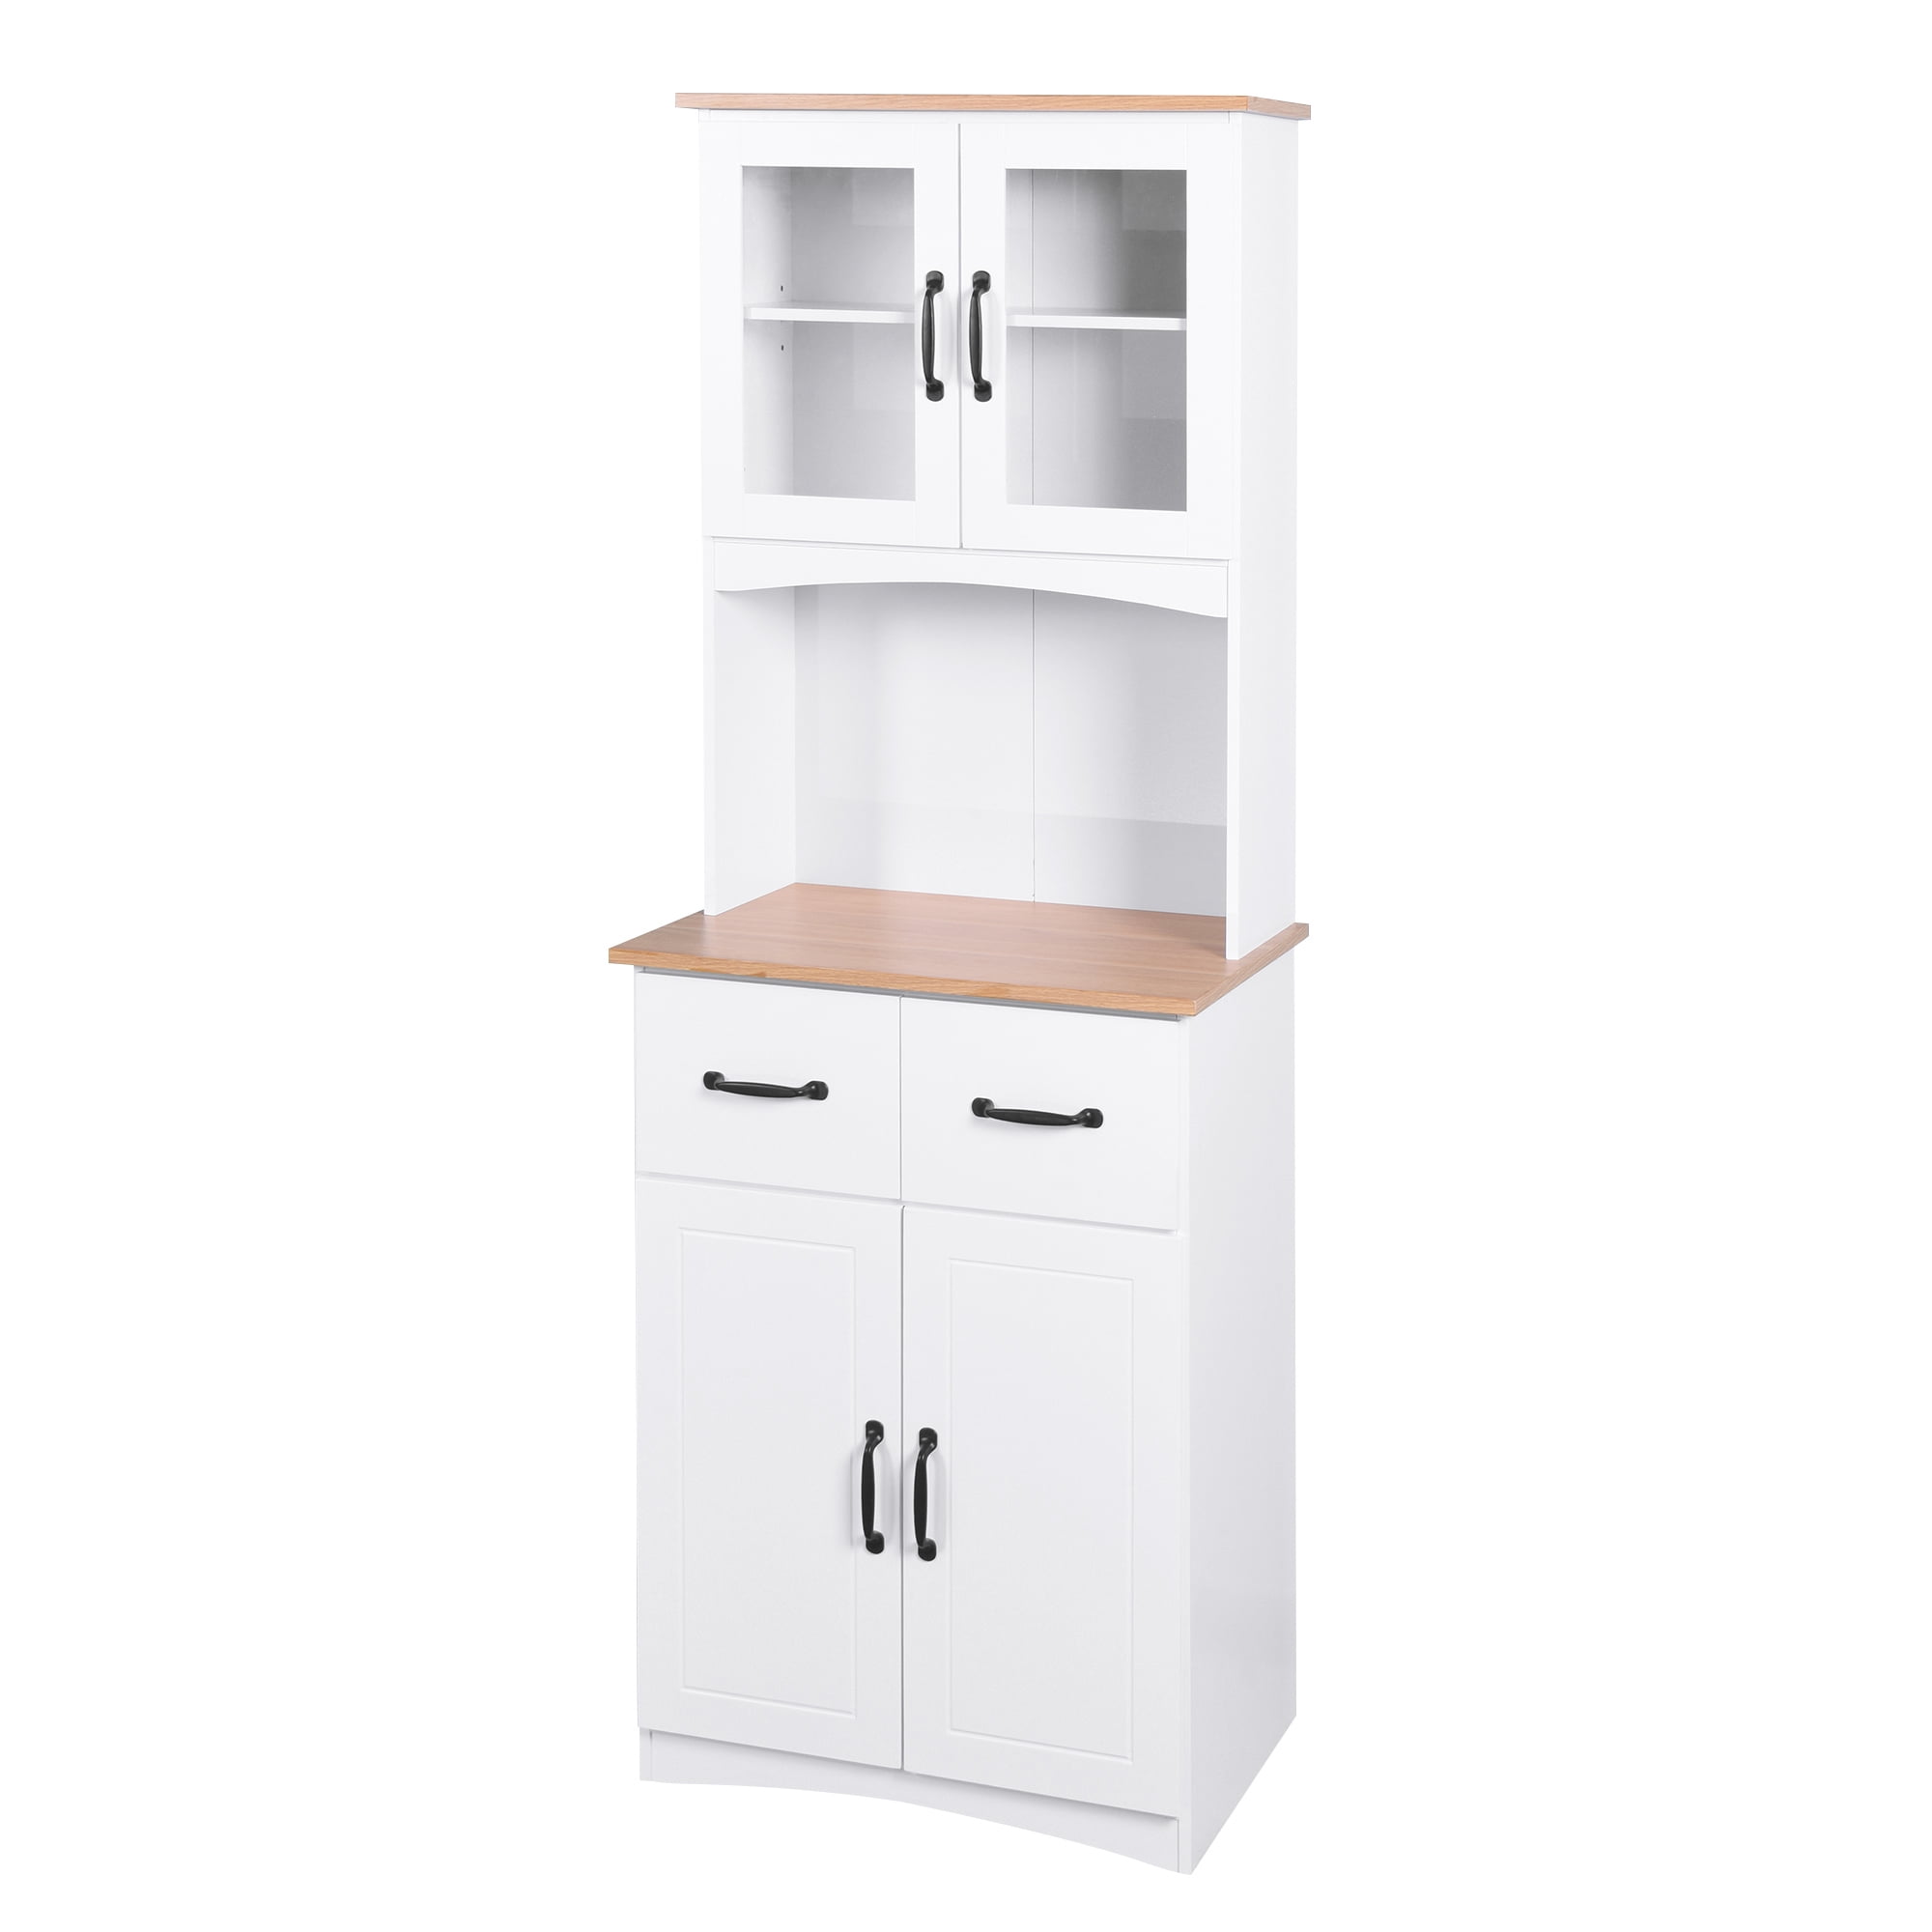 White Microwave Stand with Top and Bottom Cabinets - Walmart.com